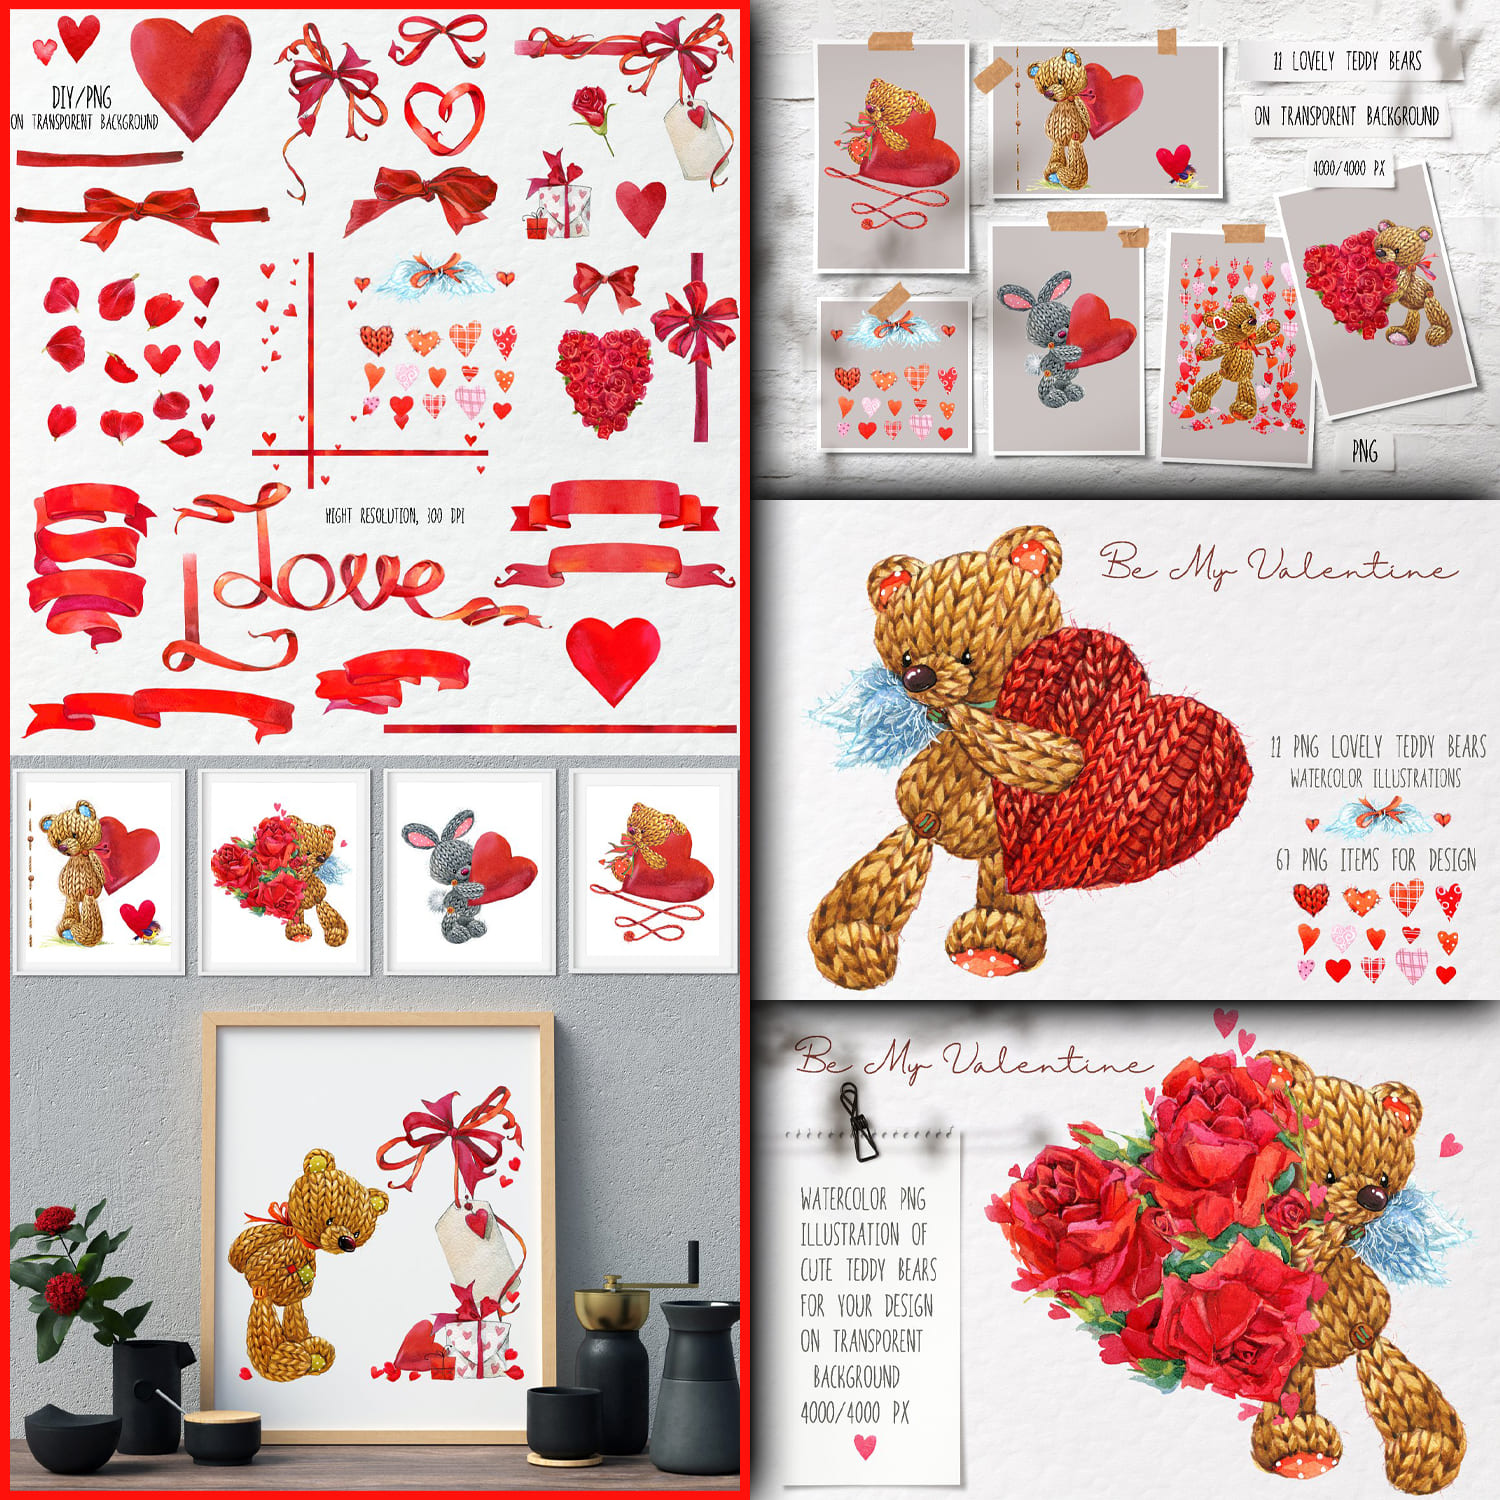 A knitted teddy bear and bunnies are decorated with red ribbons for Valentine's Day.